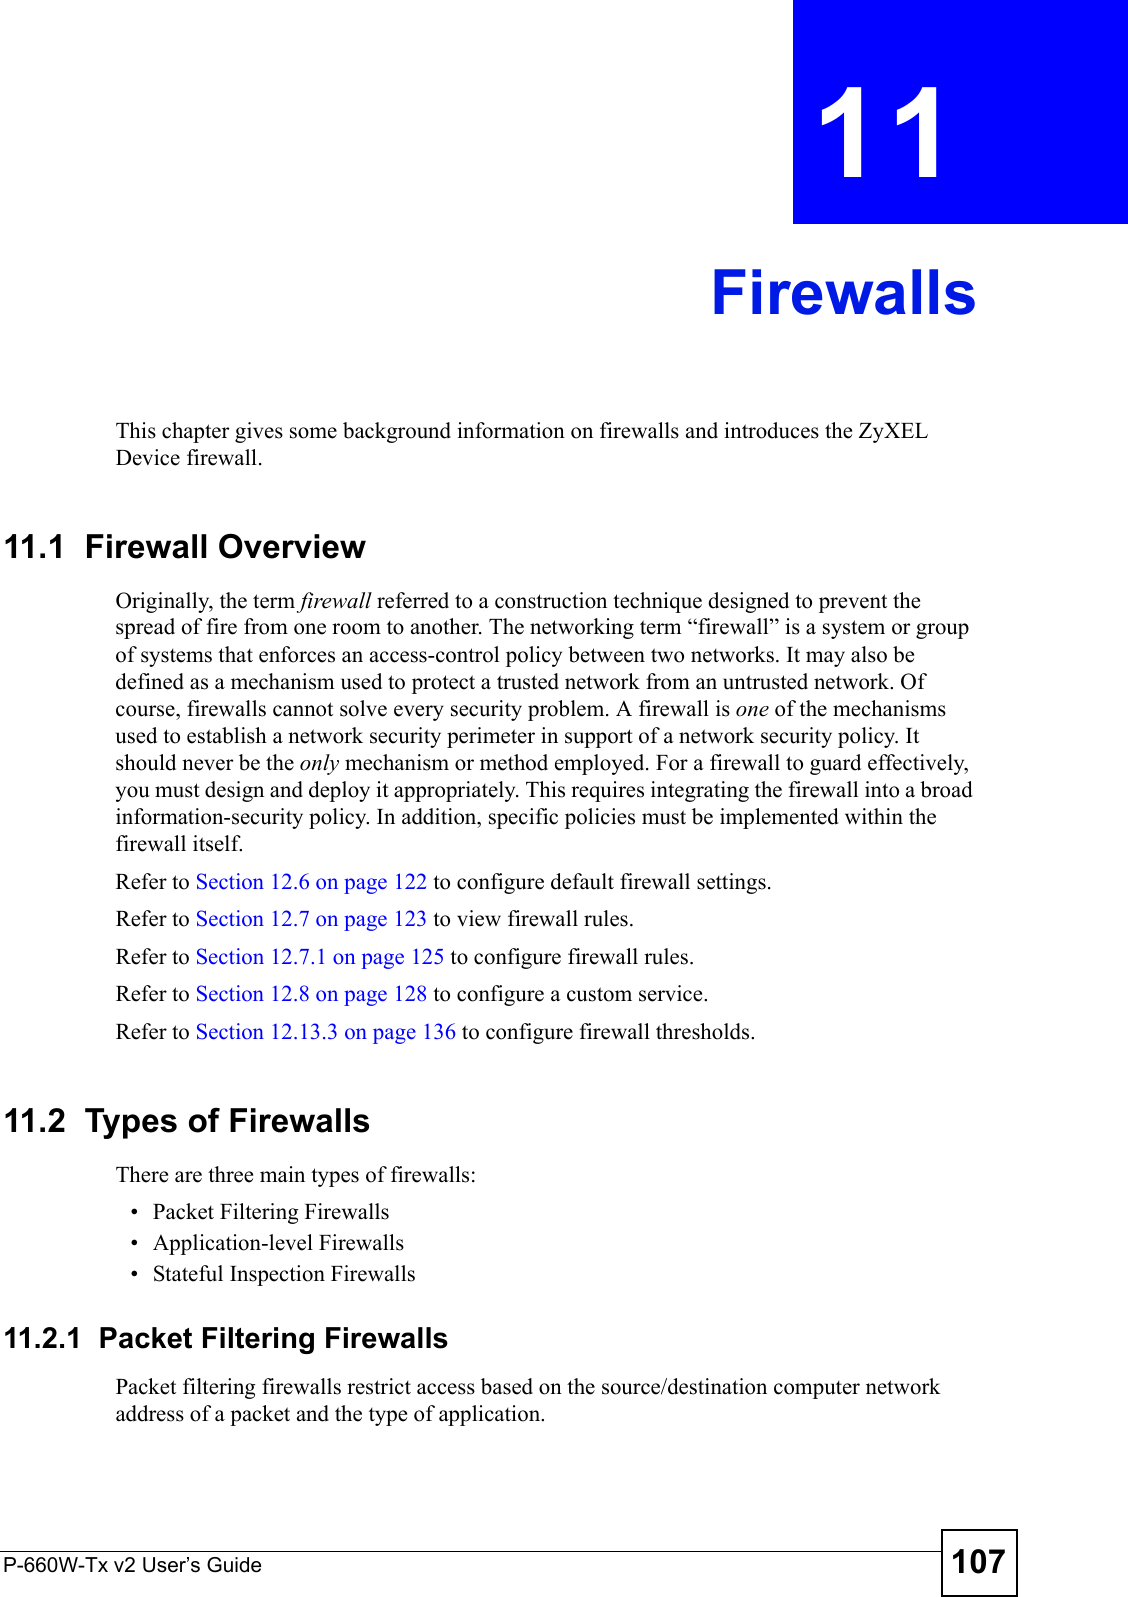 P-660W-Tx v2 User’s Guide 107CHAPTER  11 FirewallsThis chapter gives some background information on firewalls and introduces the ZyXEL Device firewall.11.1  Firewall Overview Originally, the term firewall referred to a construction technique designed to prevent the spread of fire from one room to another. The networking term “firewall” is a system or group of systems that enforces an access-control policy between two networks. It may also be defined as a mechanism used to protect a trusted network from an untrusted network. Of course, firewalls cannot solve every security problem. A firewall is one of the mechanisms used to establish a network security perimeter in support of a network security policy. It should never be the only mechanism or method employed. For a firewall to guard effectively, you must design and deploy it appropriately. This requires integrating the firewall into a broad information-security policy. In addition, specific policies must be implemented within the firewall itself. Refer to Section 12.6 on page 122 to configure default firewall settings. Refer to Section 12.7 on page 123 to view firewall rules. Refer to Section 12.7.1 on page 125 to configure firewall rules. Refer to Section 12.8 on page 128 to configure a custom service. Refer to Section 12.13.3 on page 136 to configure firewall thresholds. 11.2  Types of FirewallsThere are three main types of firewalls:• Packet Filtering Firewalls• Application-level Firewalls• Stateful Inspection Firewalls11.2.1  Packet Filtering FirewallsPacket filtering firewalls restrict access based on the source/destination computer network address of a packet and the type of application. 